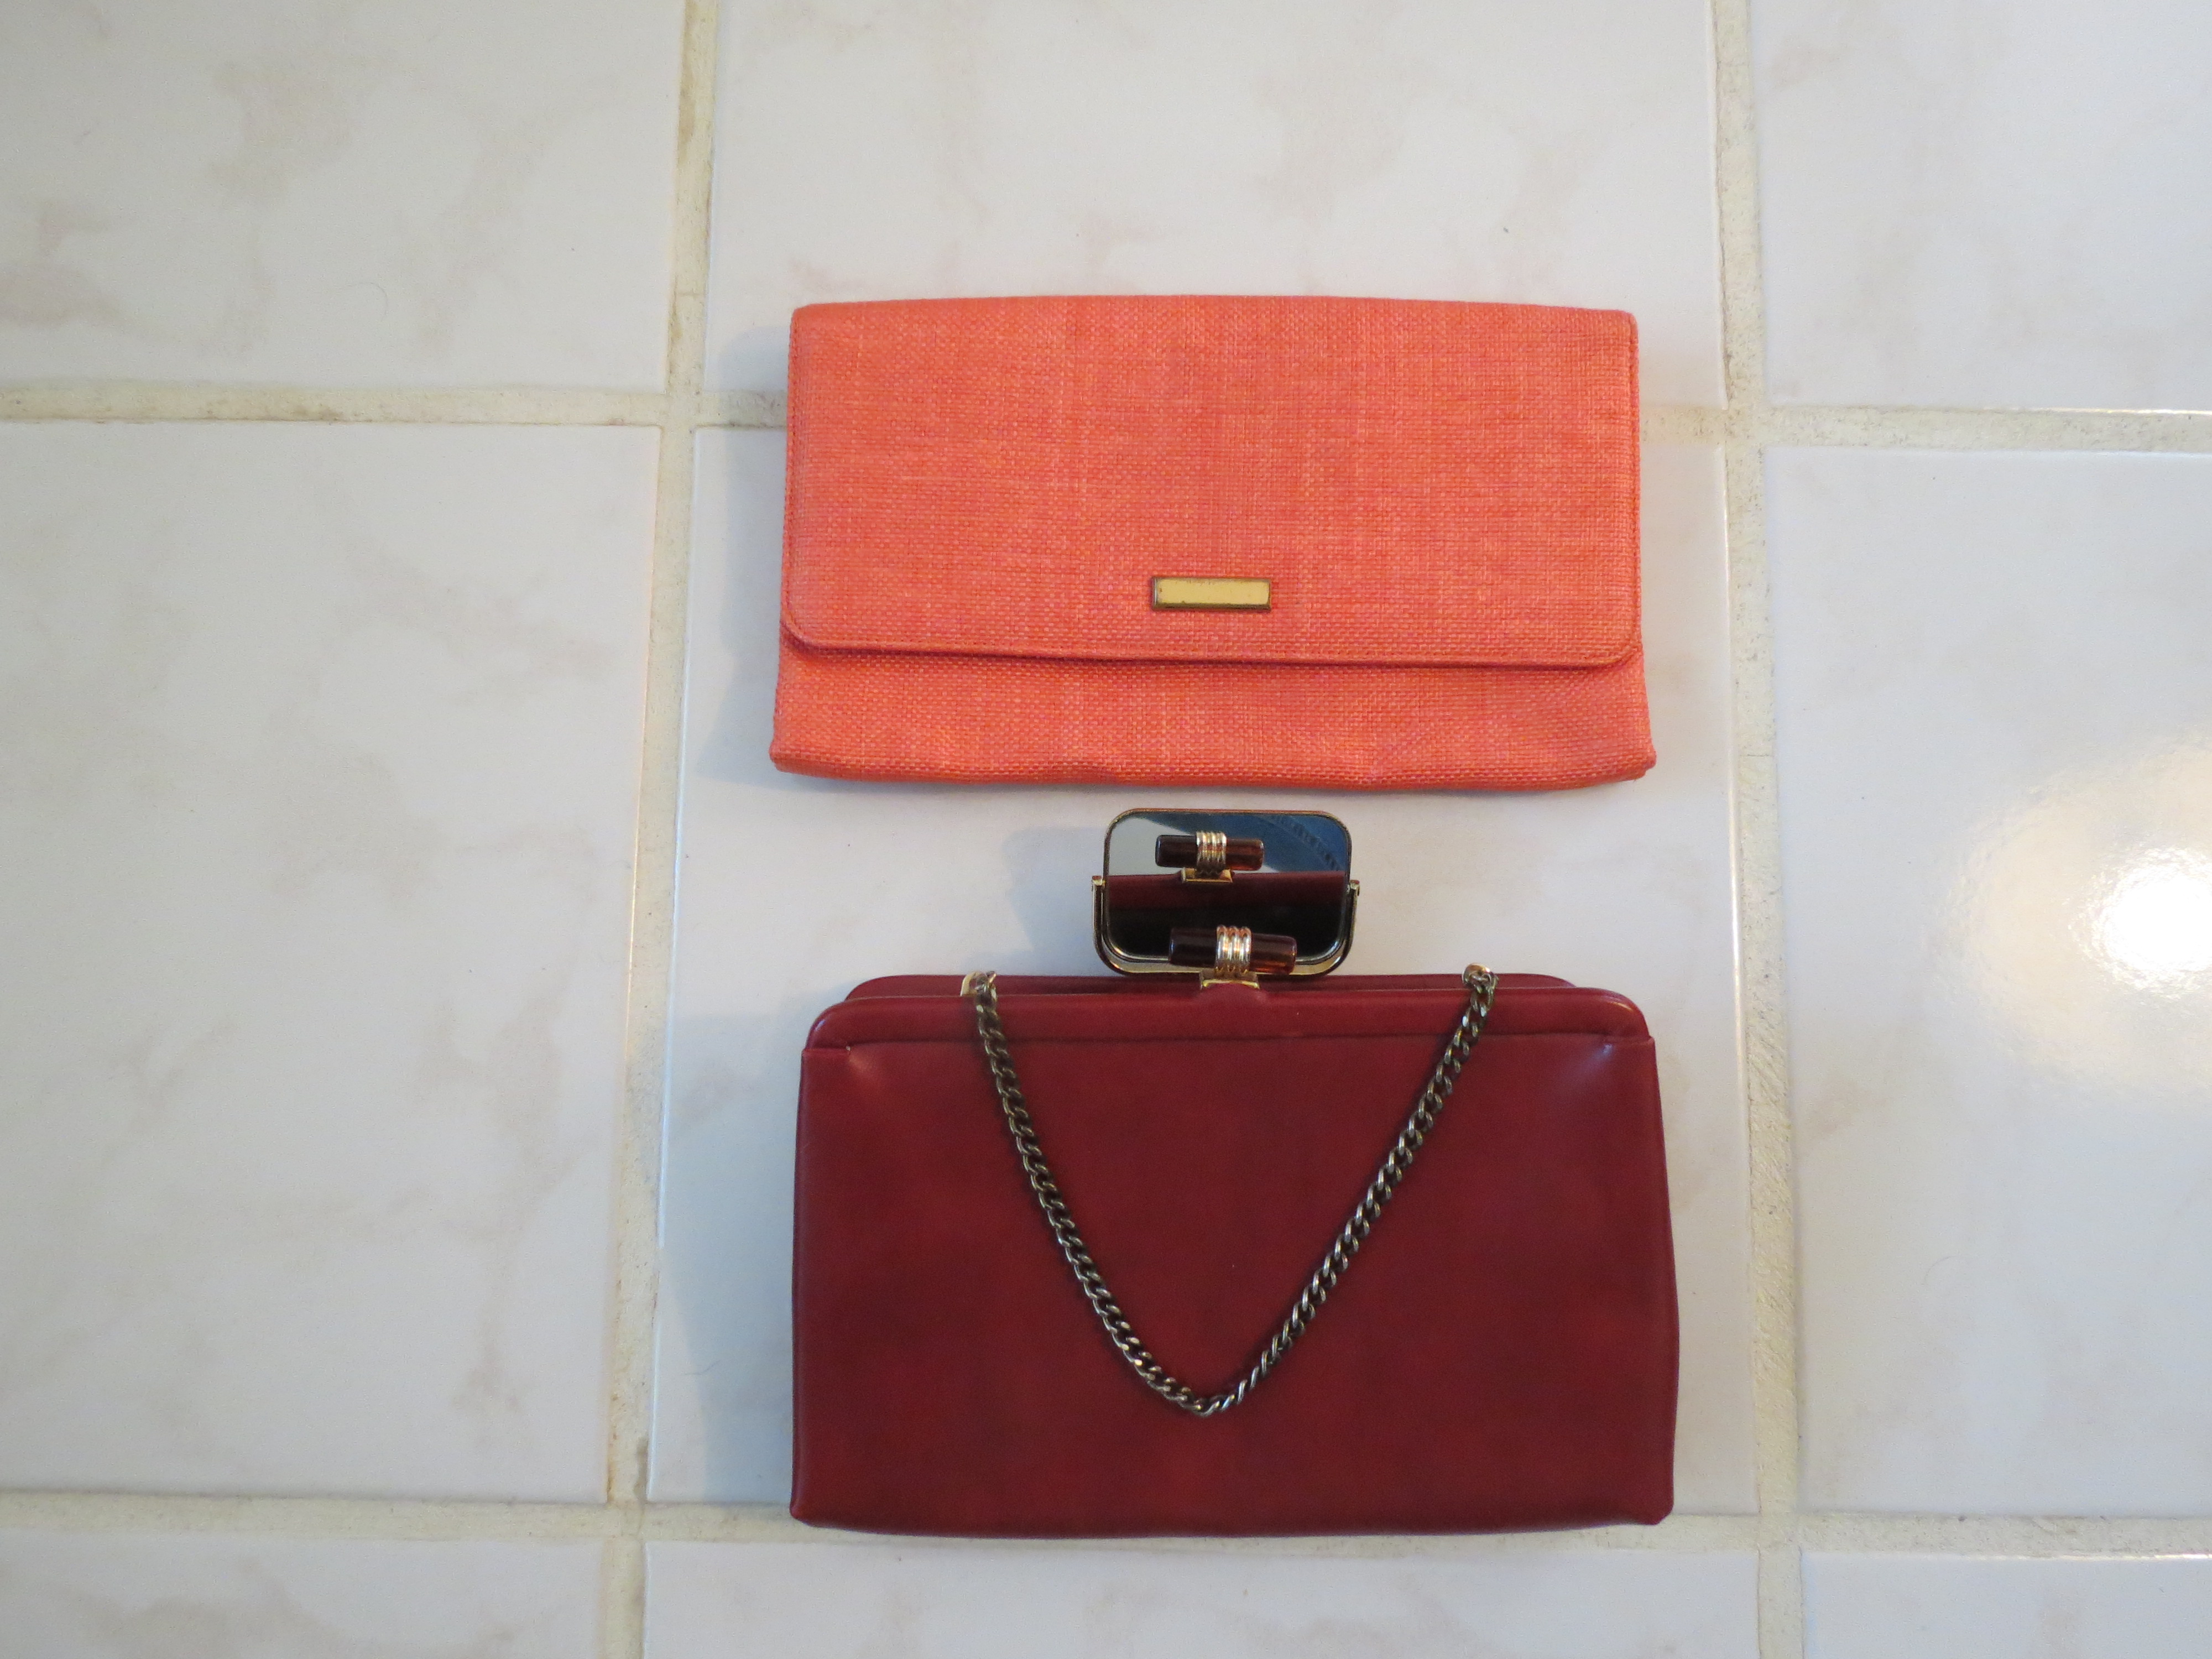 TWO TRUE VINTAGE PURSES FOR SPRING BY MORRIS MOSCOWITZ & ANDE'